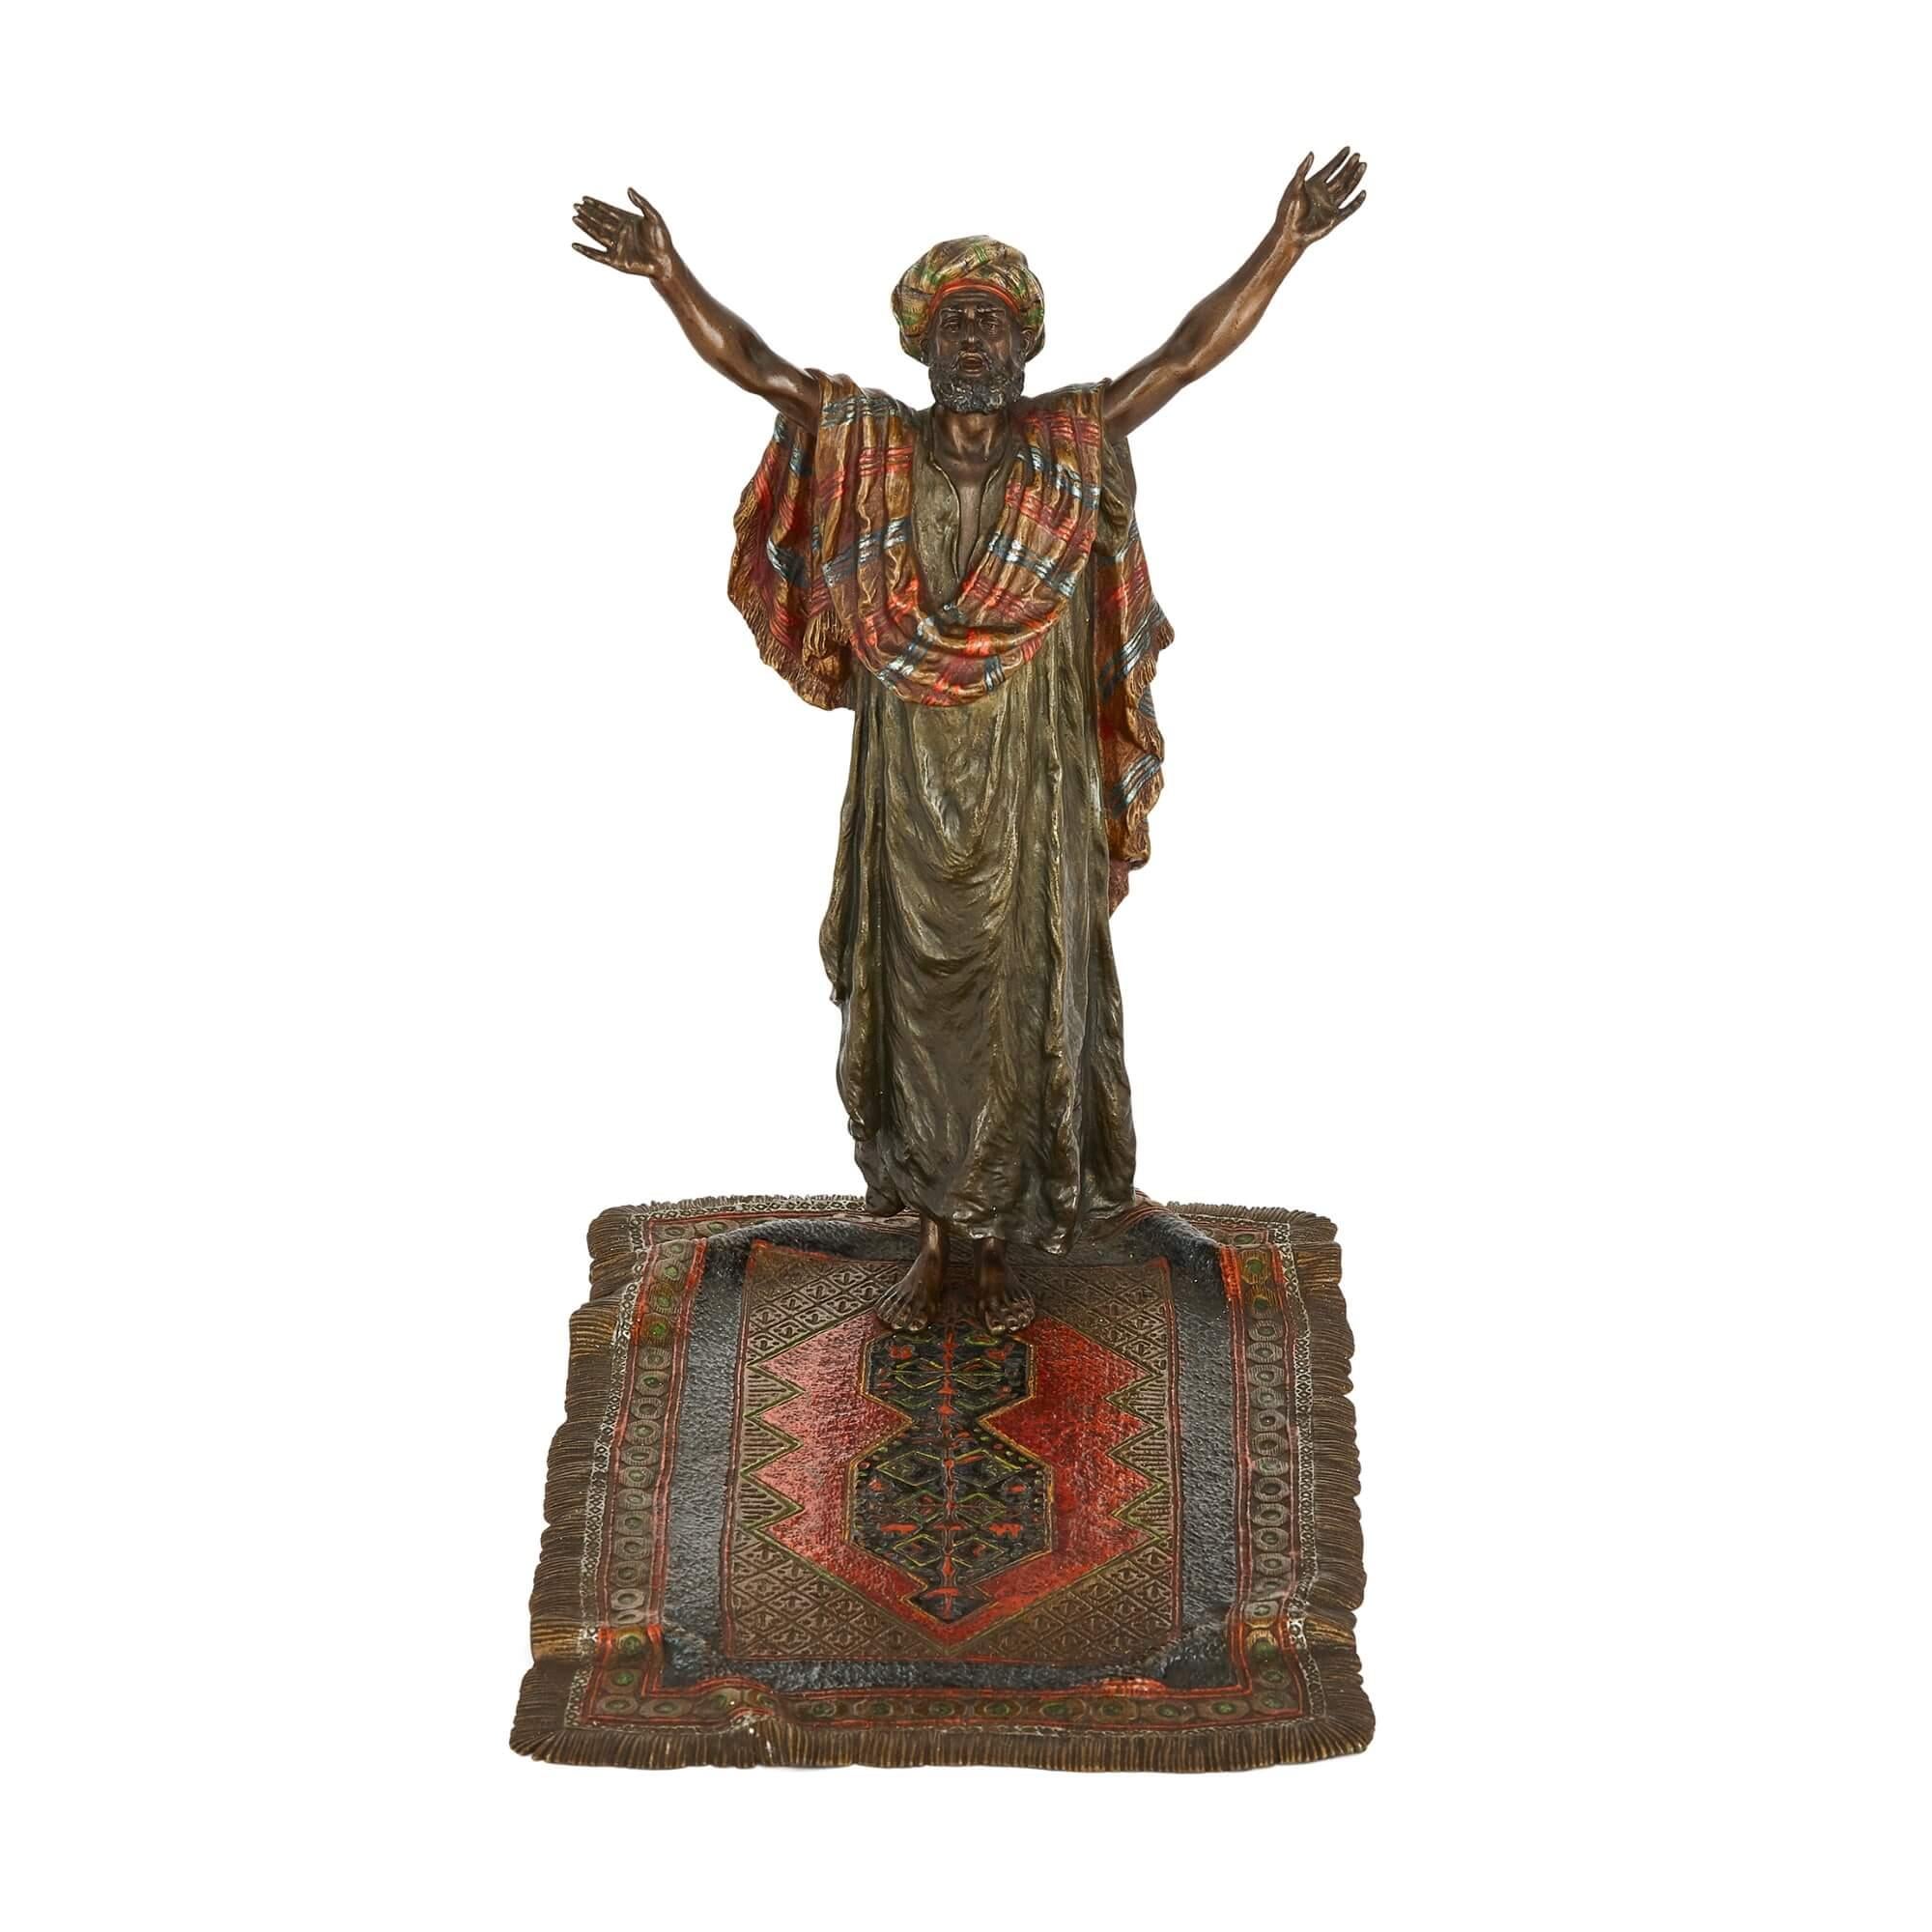 Large Orientalist bronze group by Bergman
Austrian, c. 1910
Measures: Height 28cm, width 18cm, depth 27cm

This exceptional bronze group is by Bergman, one of early twentieth-century Vienna’s most famed producers. The group, crafted from